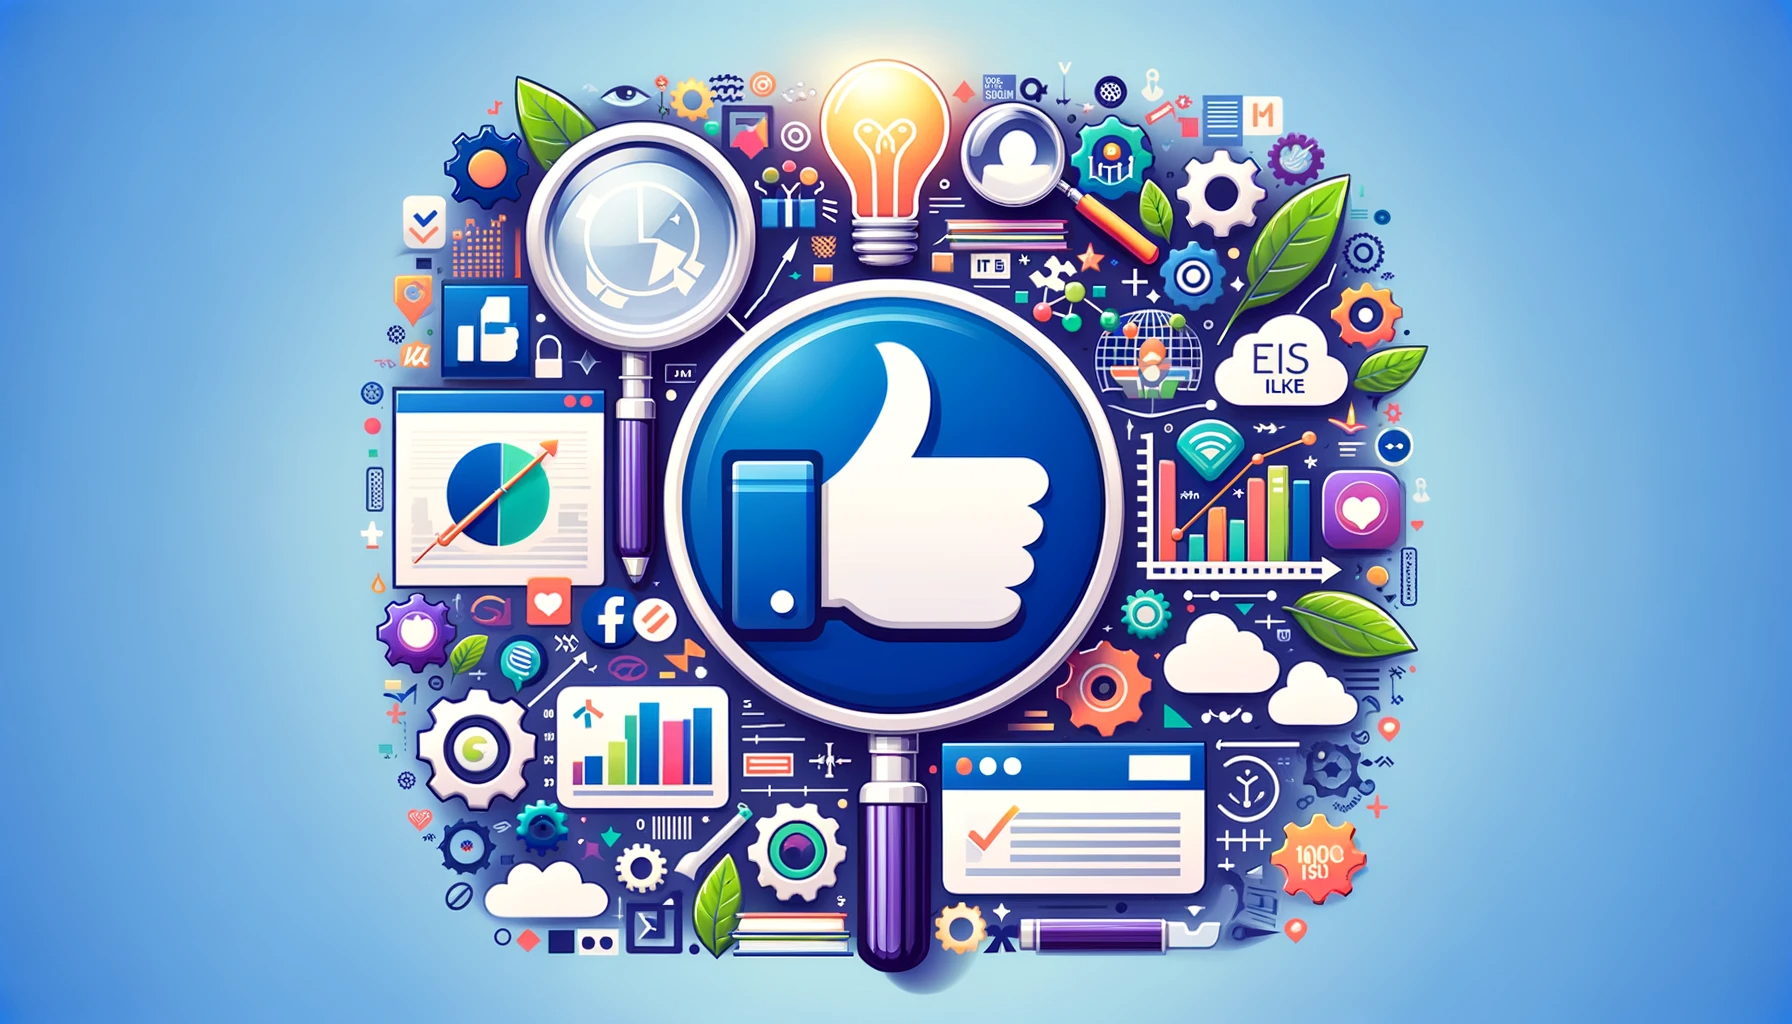 facebook-brand-building-tips-from-rank-panel-professionals